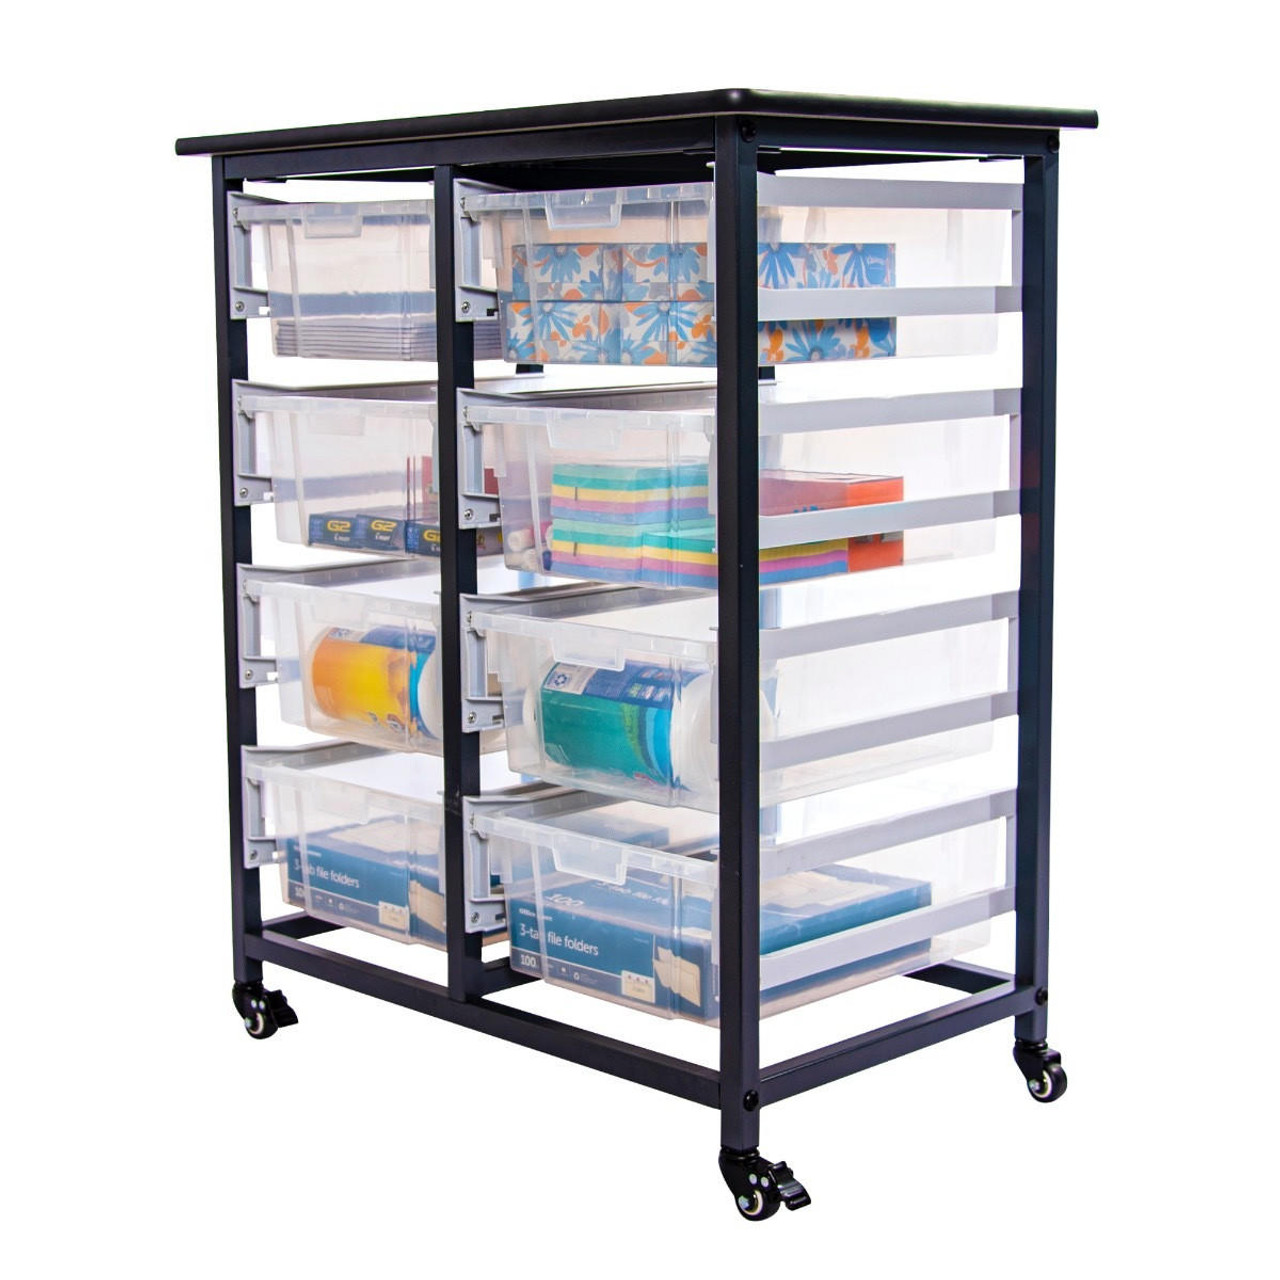 https://cdn11.bigcommerce.com/s-36yz7qwnyo/images/stencil/1280x1280/products/26690/53514/luxor-mobile-bin-storage-unit-double-row-with-large-clear-bins__94455.1683134086.jpg?c=1